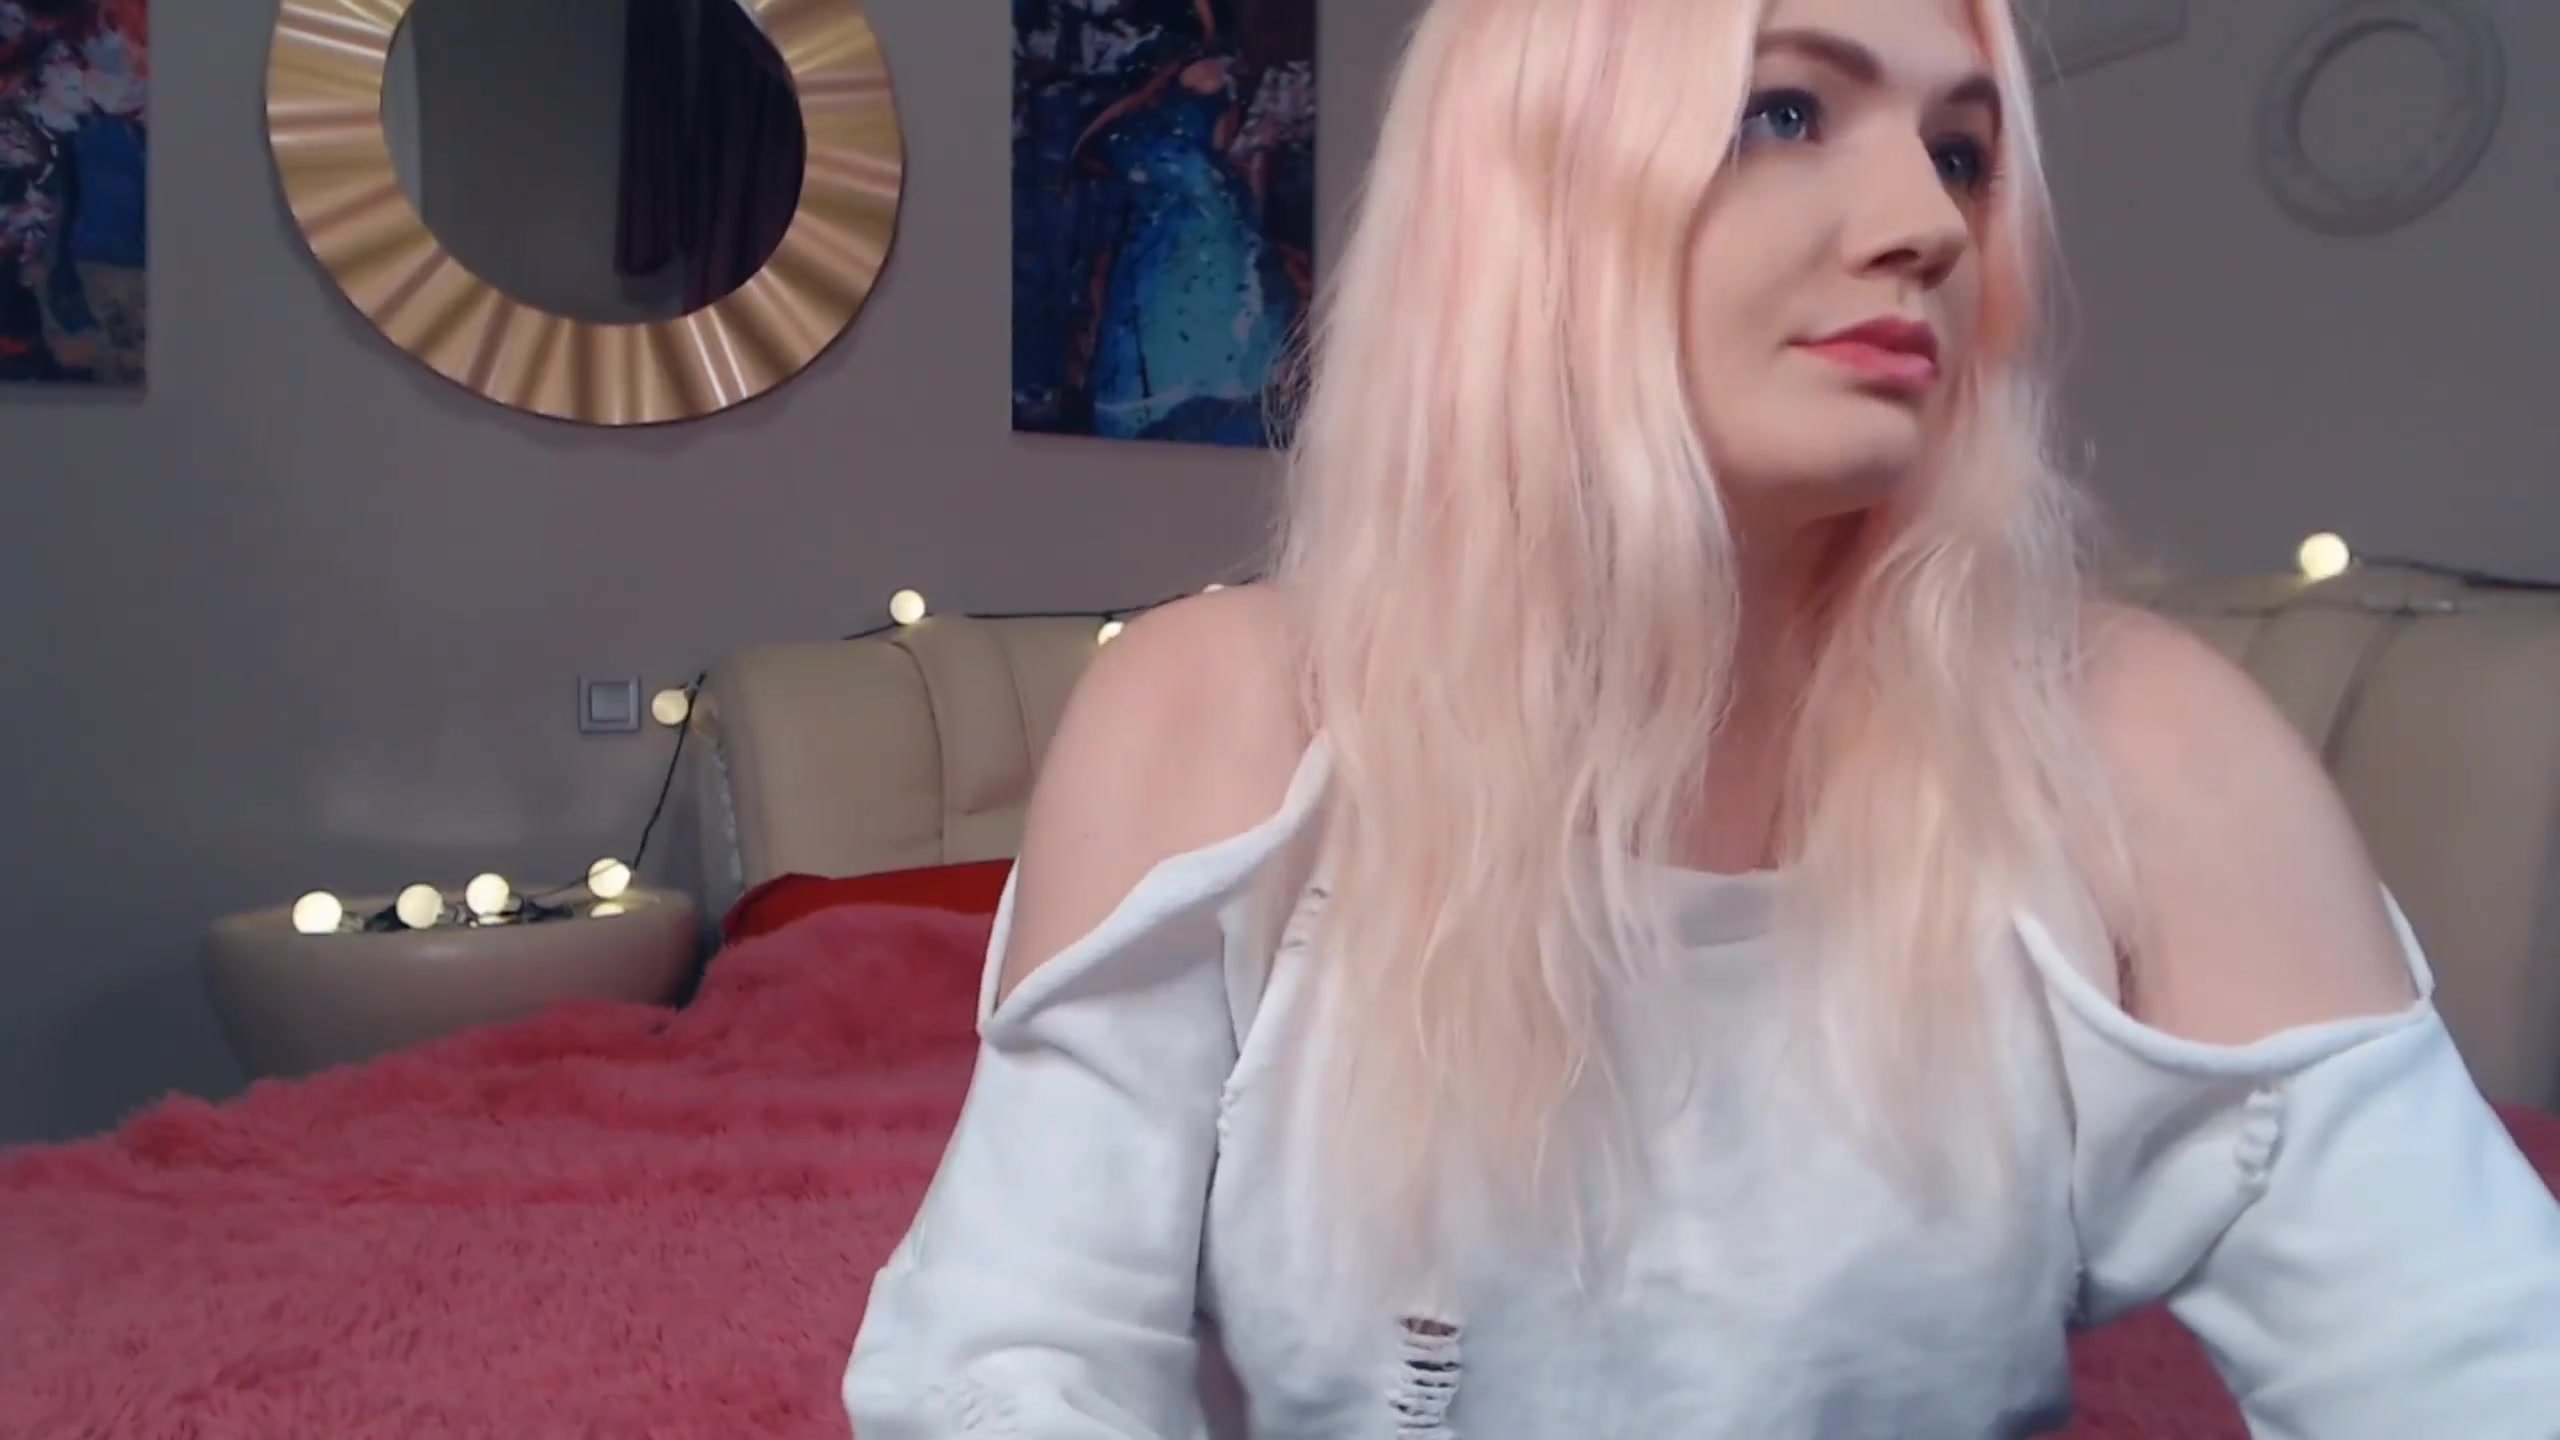 Kate_spice squirt